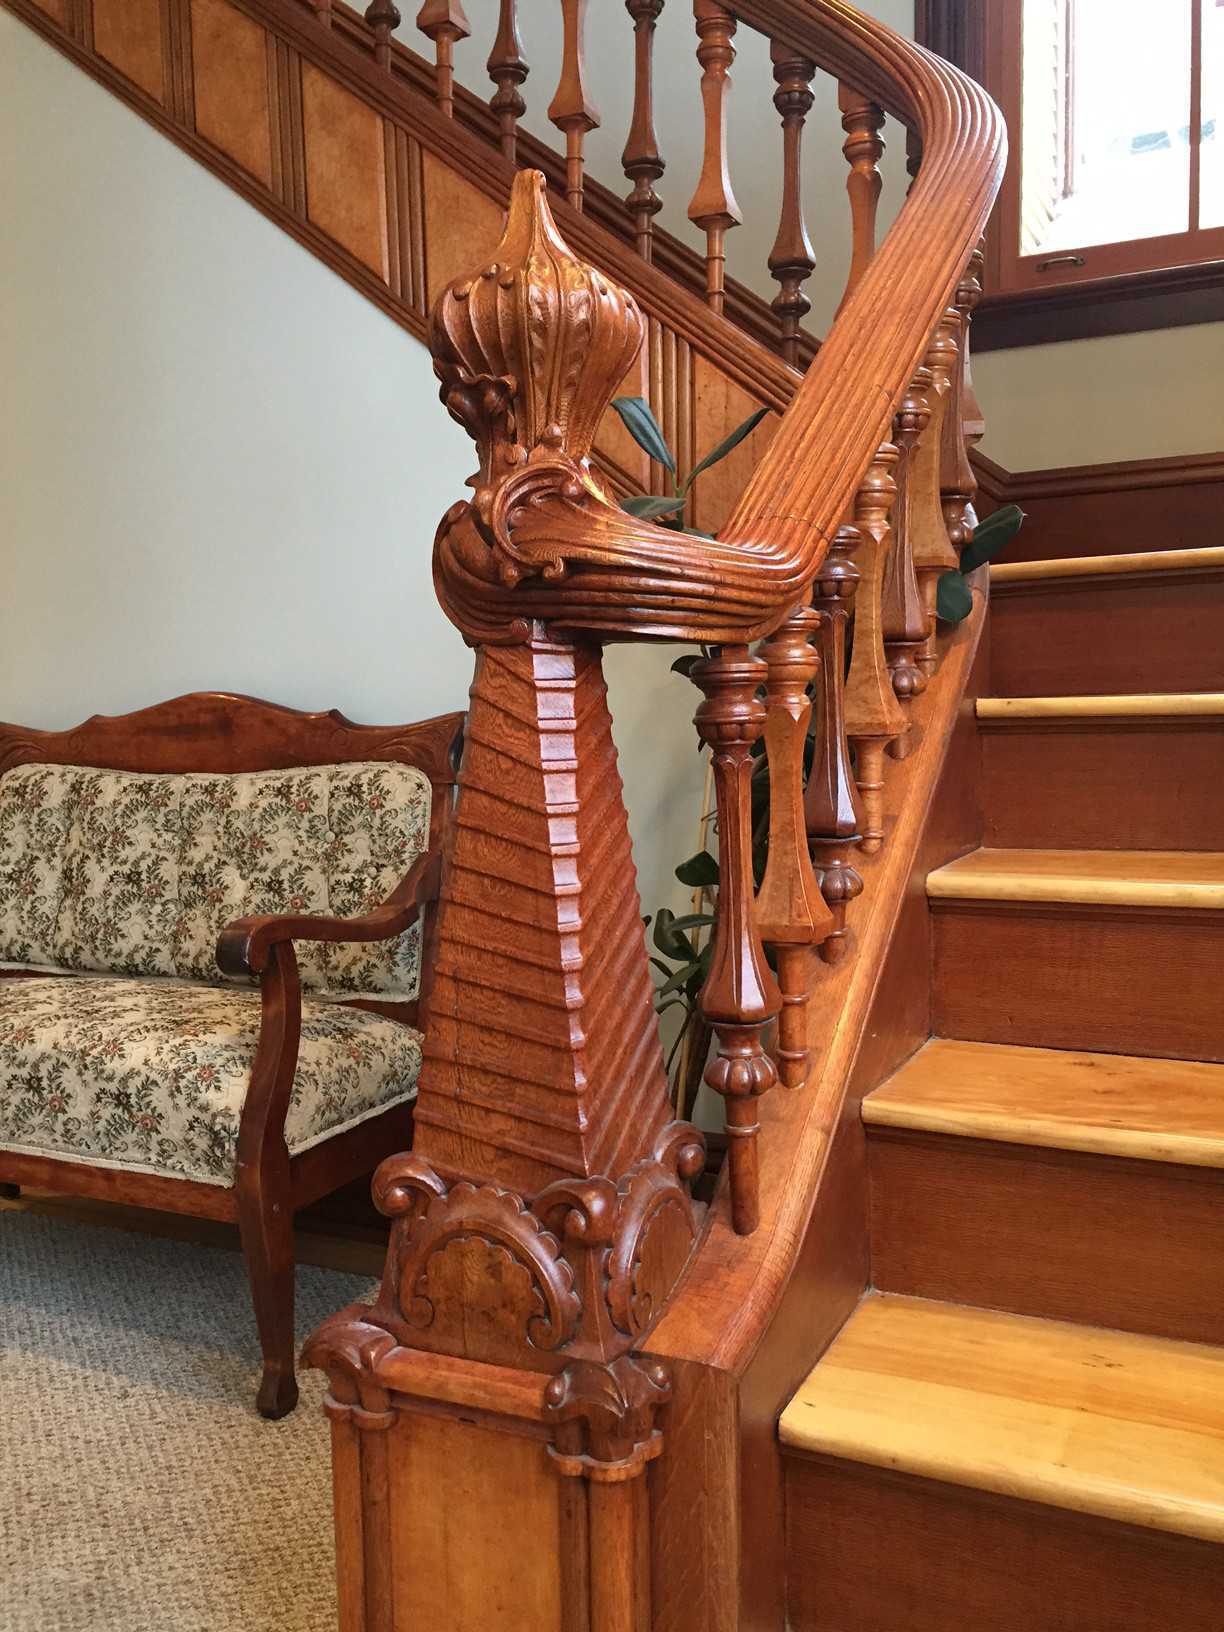 Stairs and railing with elaborate woodwork